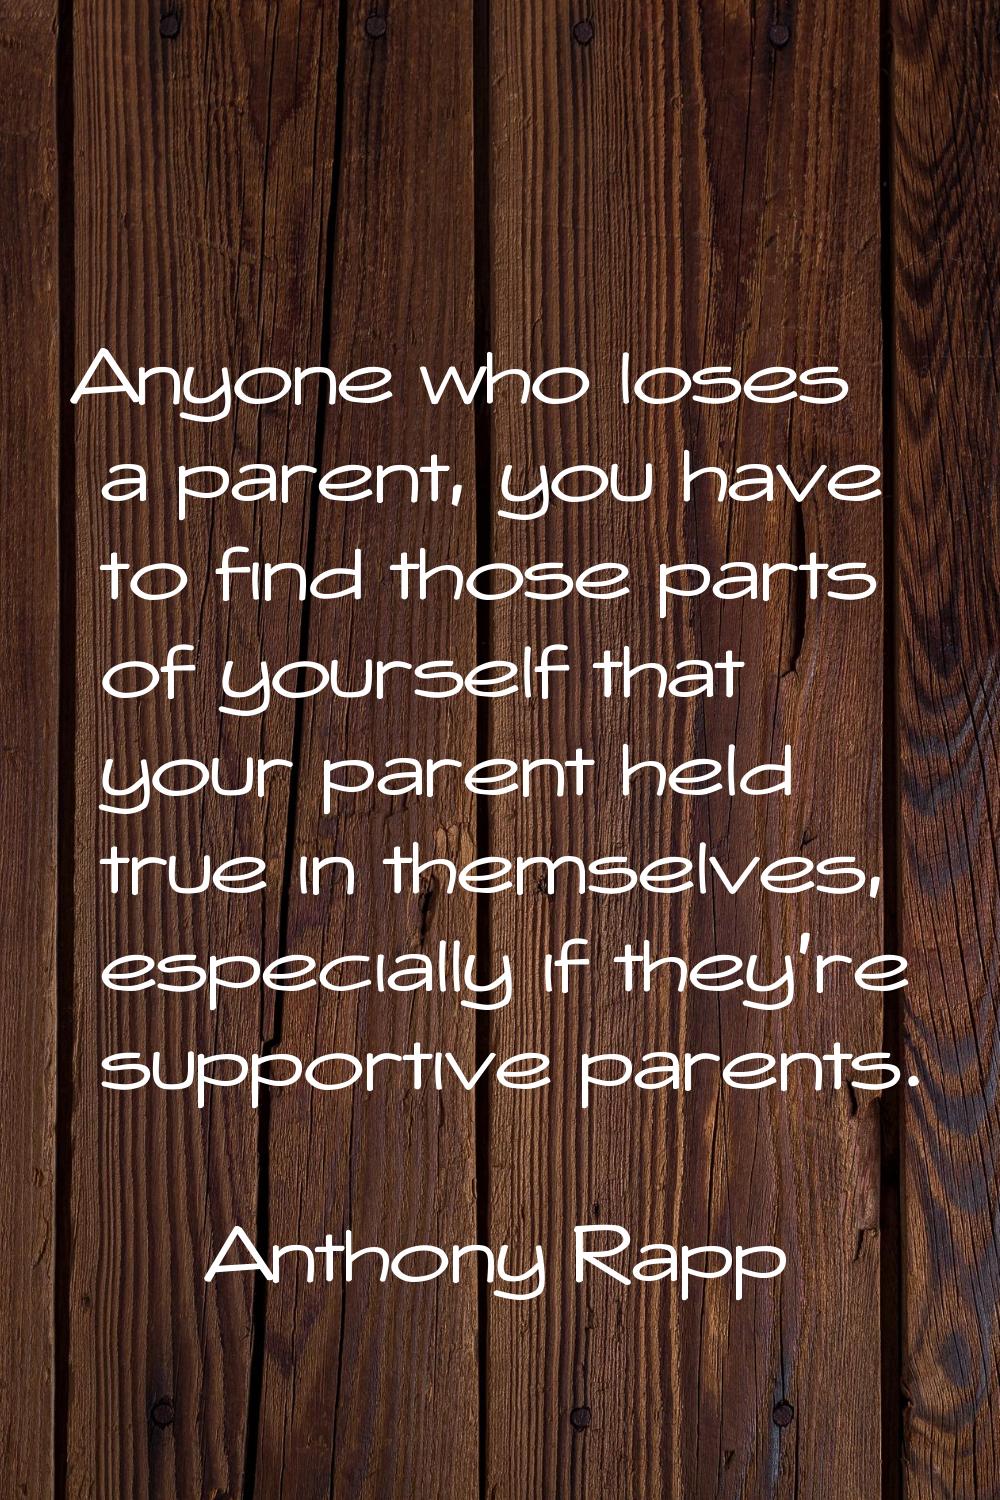 Anyone who loses a parent, you have to find those parts of yourself that your parent held true in t